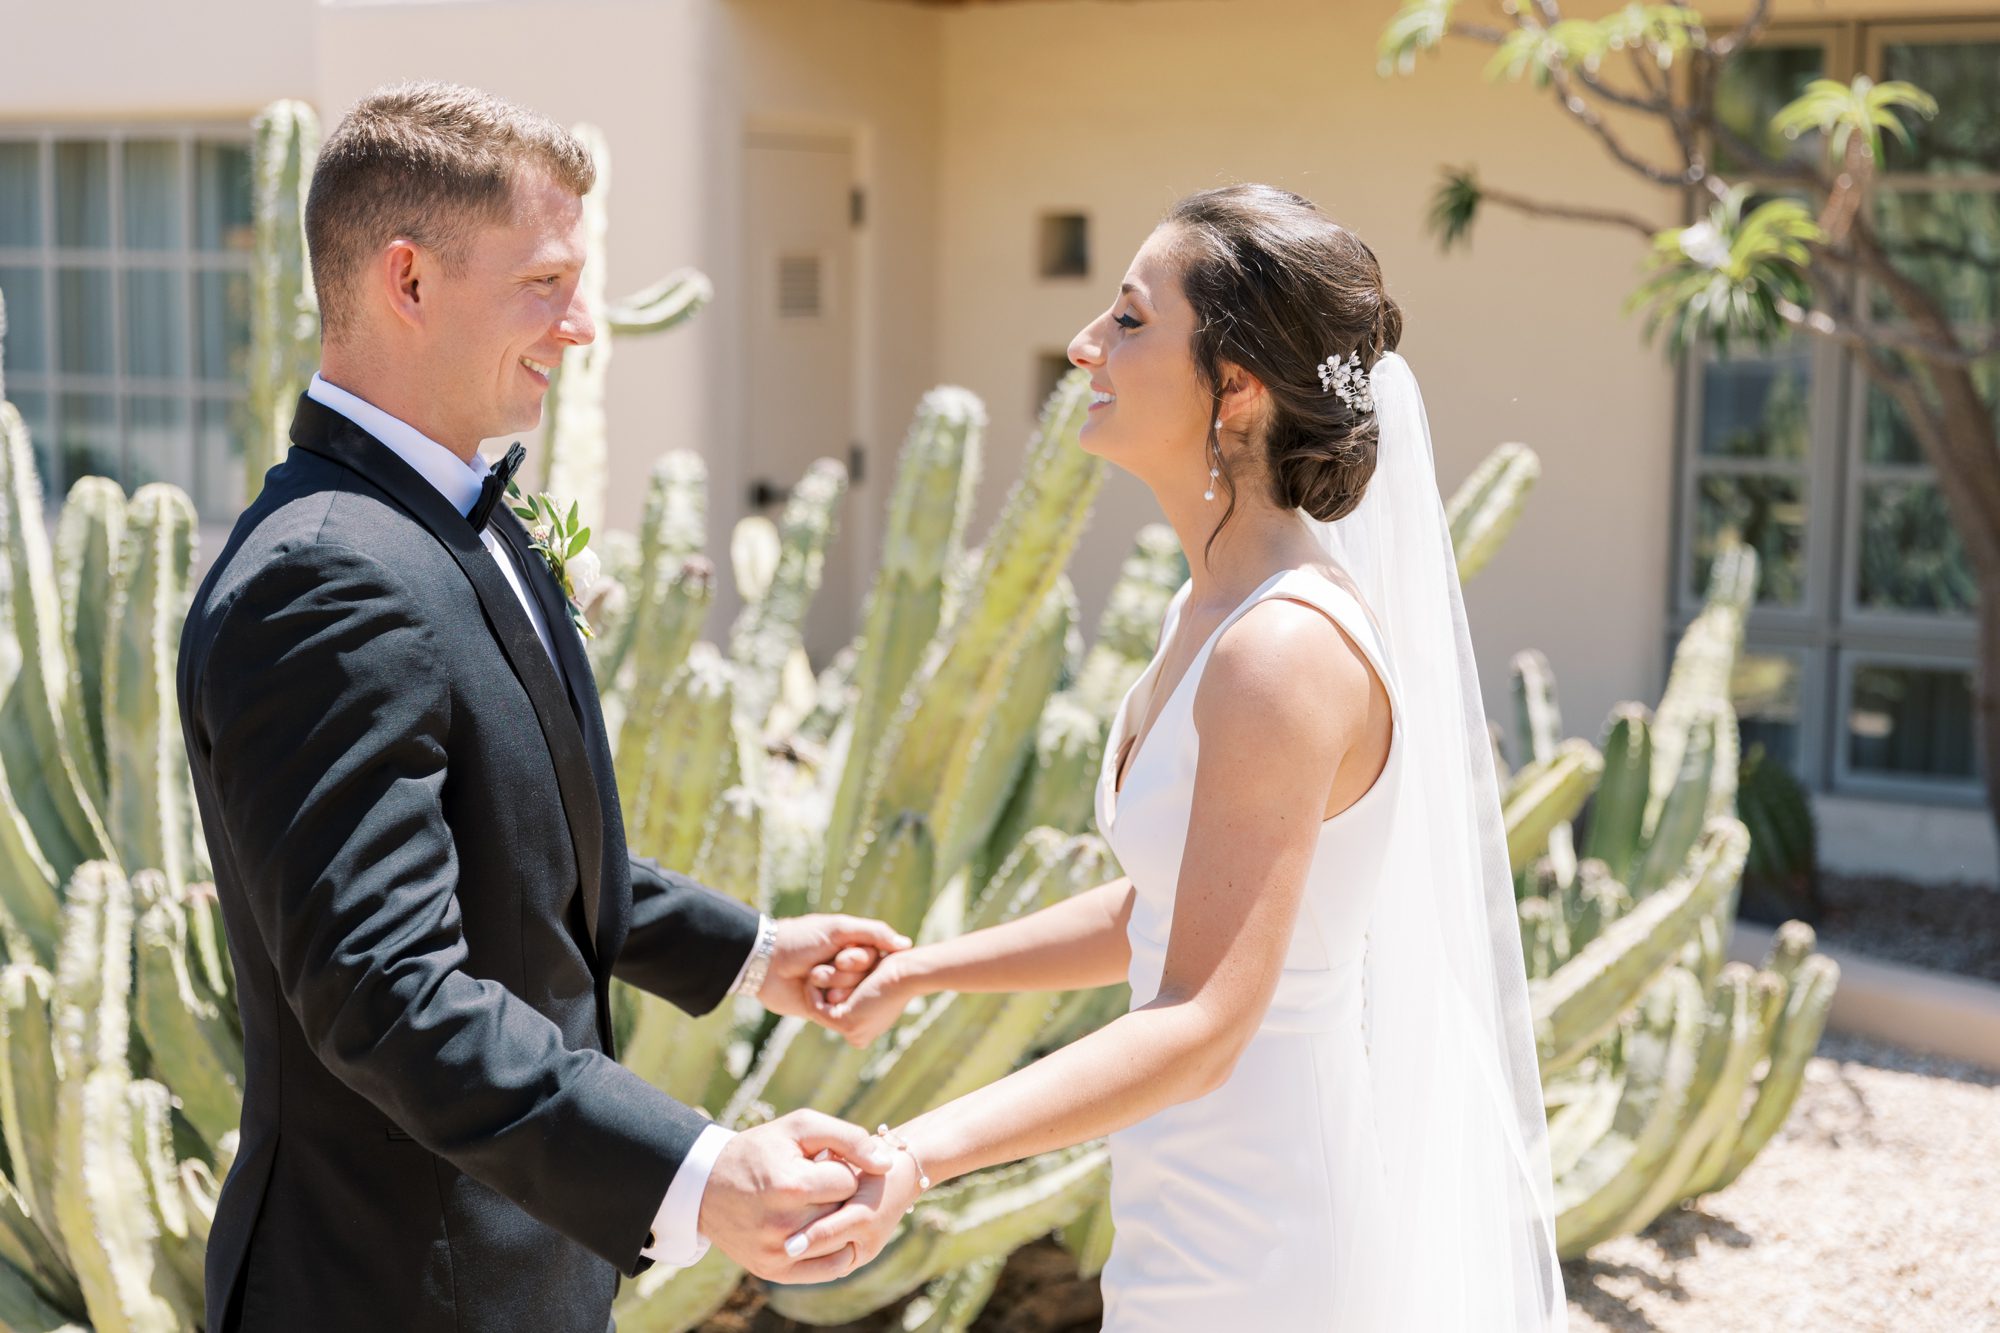 The bride and groom had their first look at the Camelback Inn in Scottsdale wedding